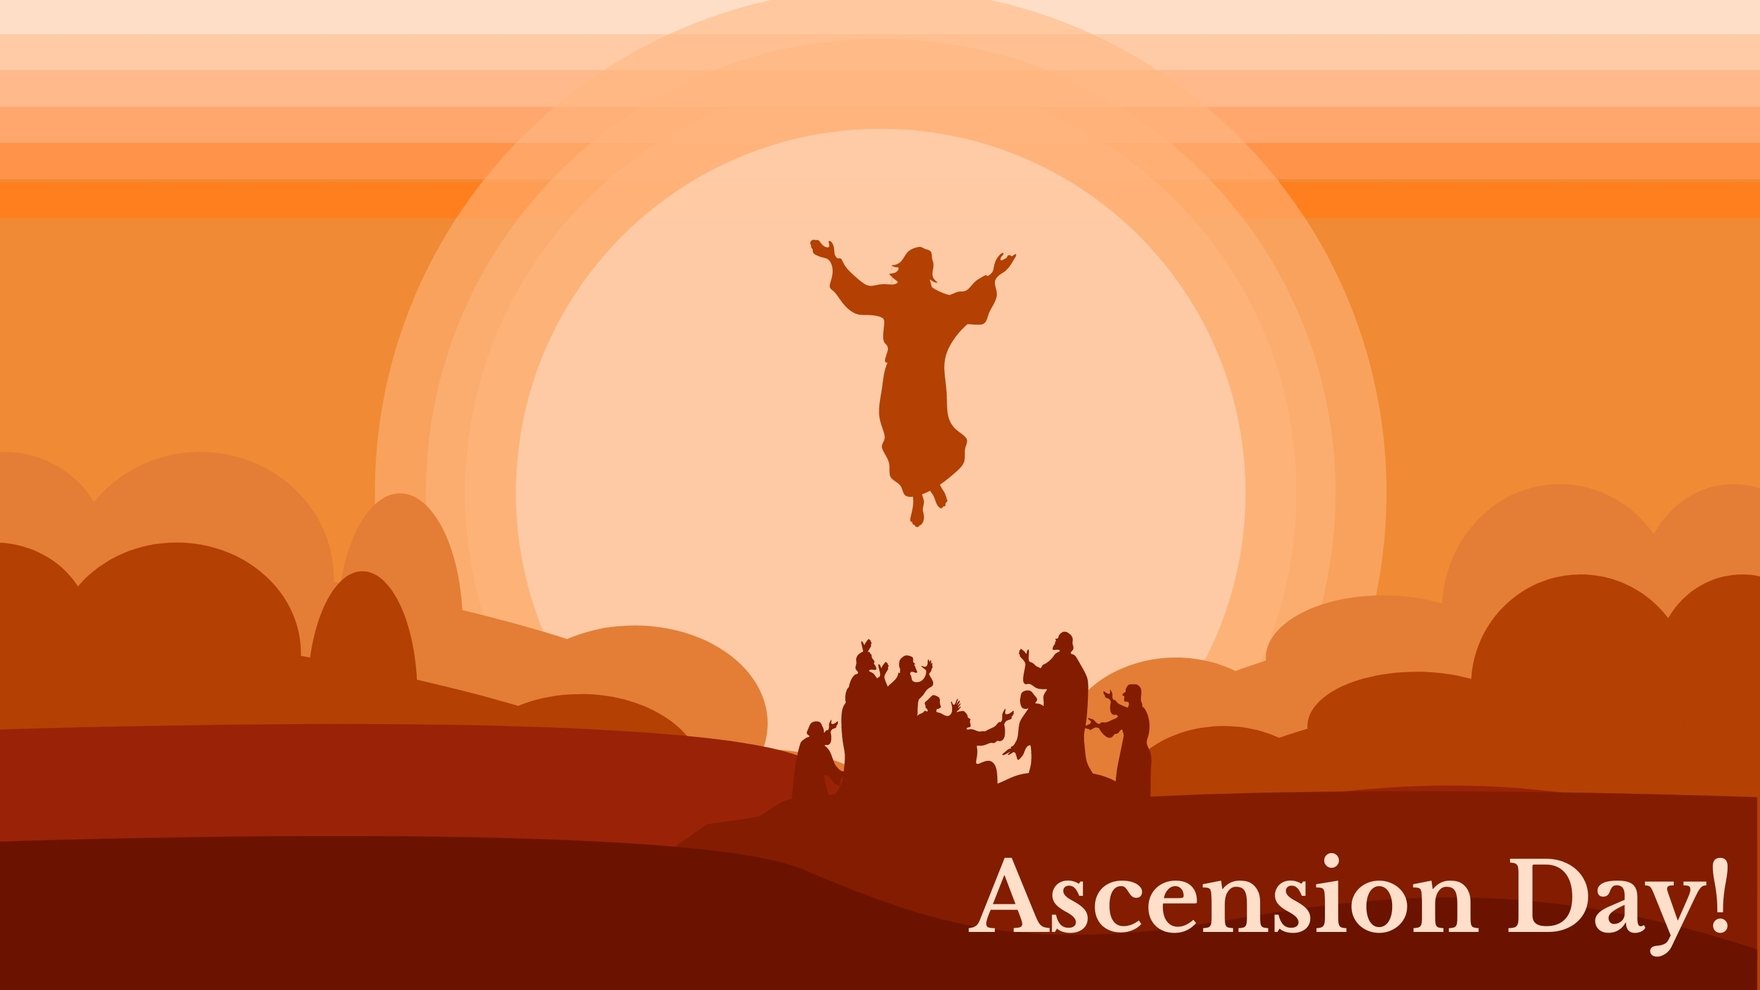 Free Ascension Day Drawing Background in PDF, Illustrator, PSD, EPS, SVG, JPG, PNG